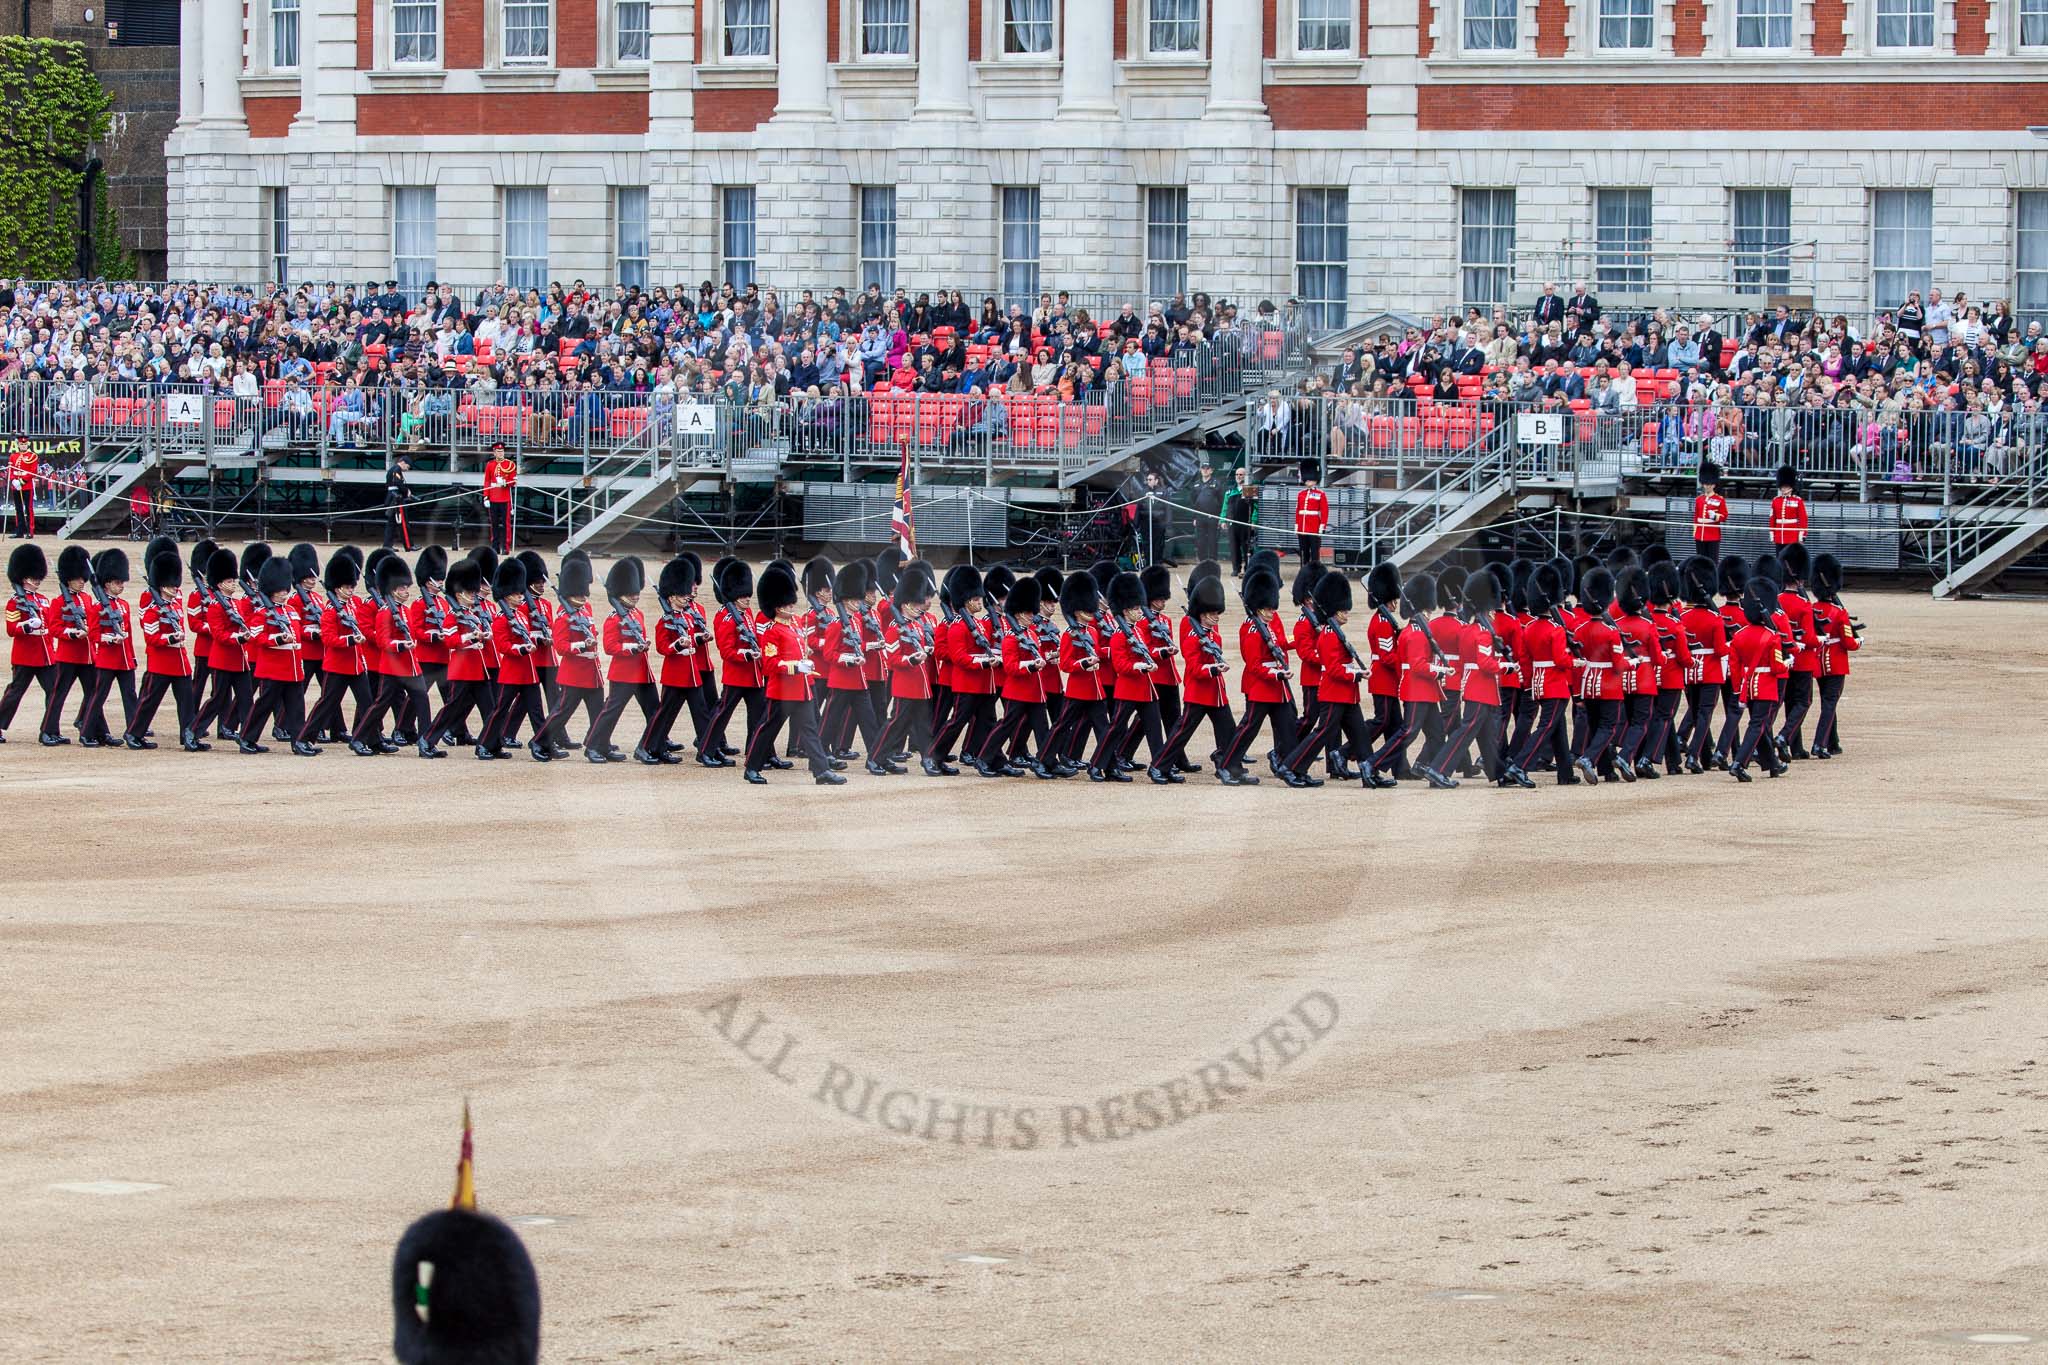 Major General's Review 2013: The Escort to the Colour is advancing in slow time..
Horse Guards Parade, Westminster,
London SW1,

United Kingdom,
on 01 June 2013 at 11:21, image #412